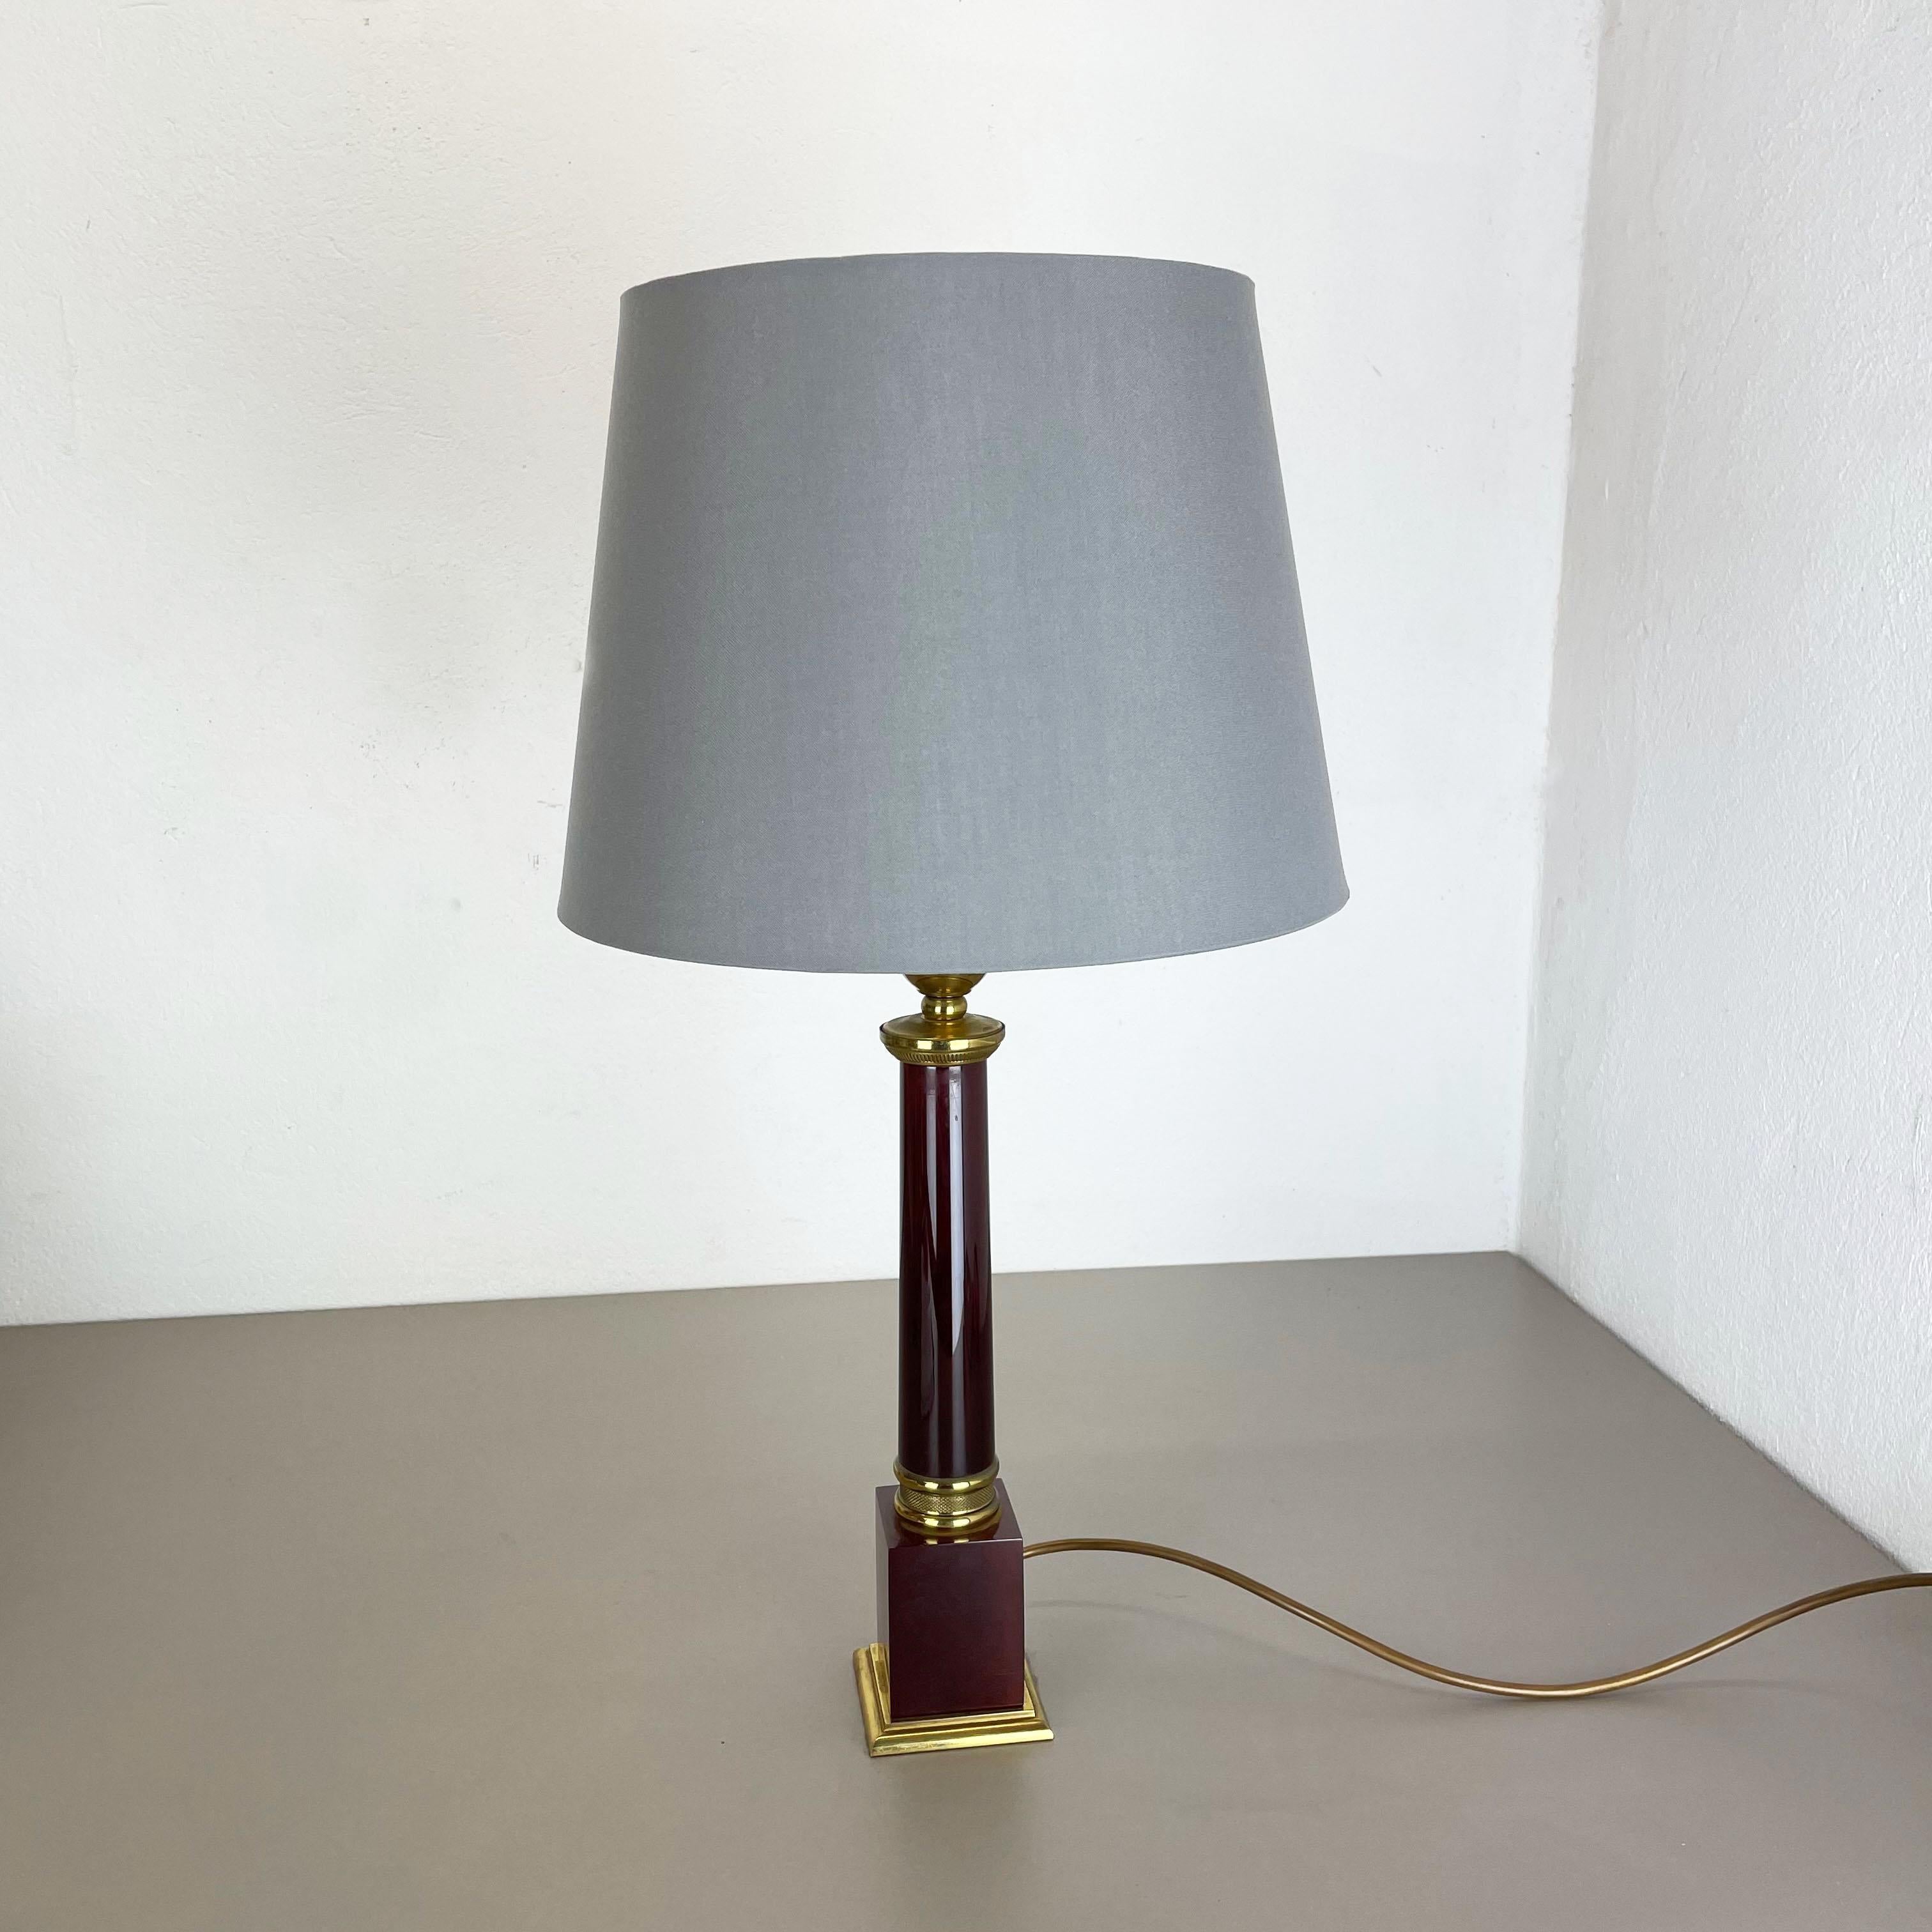 Article:

catalina table light.



Origin:

Italy



Age:

1960s



Description:


This original vintage table light was designed and produced in the 1960s in ITALY. This almost unique table light features a combination of super